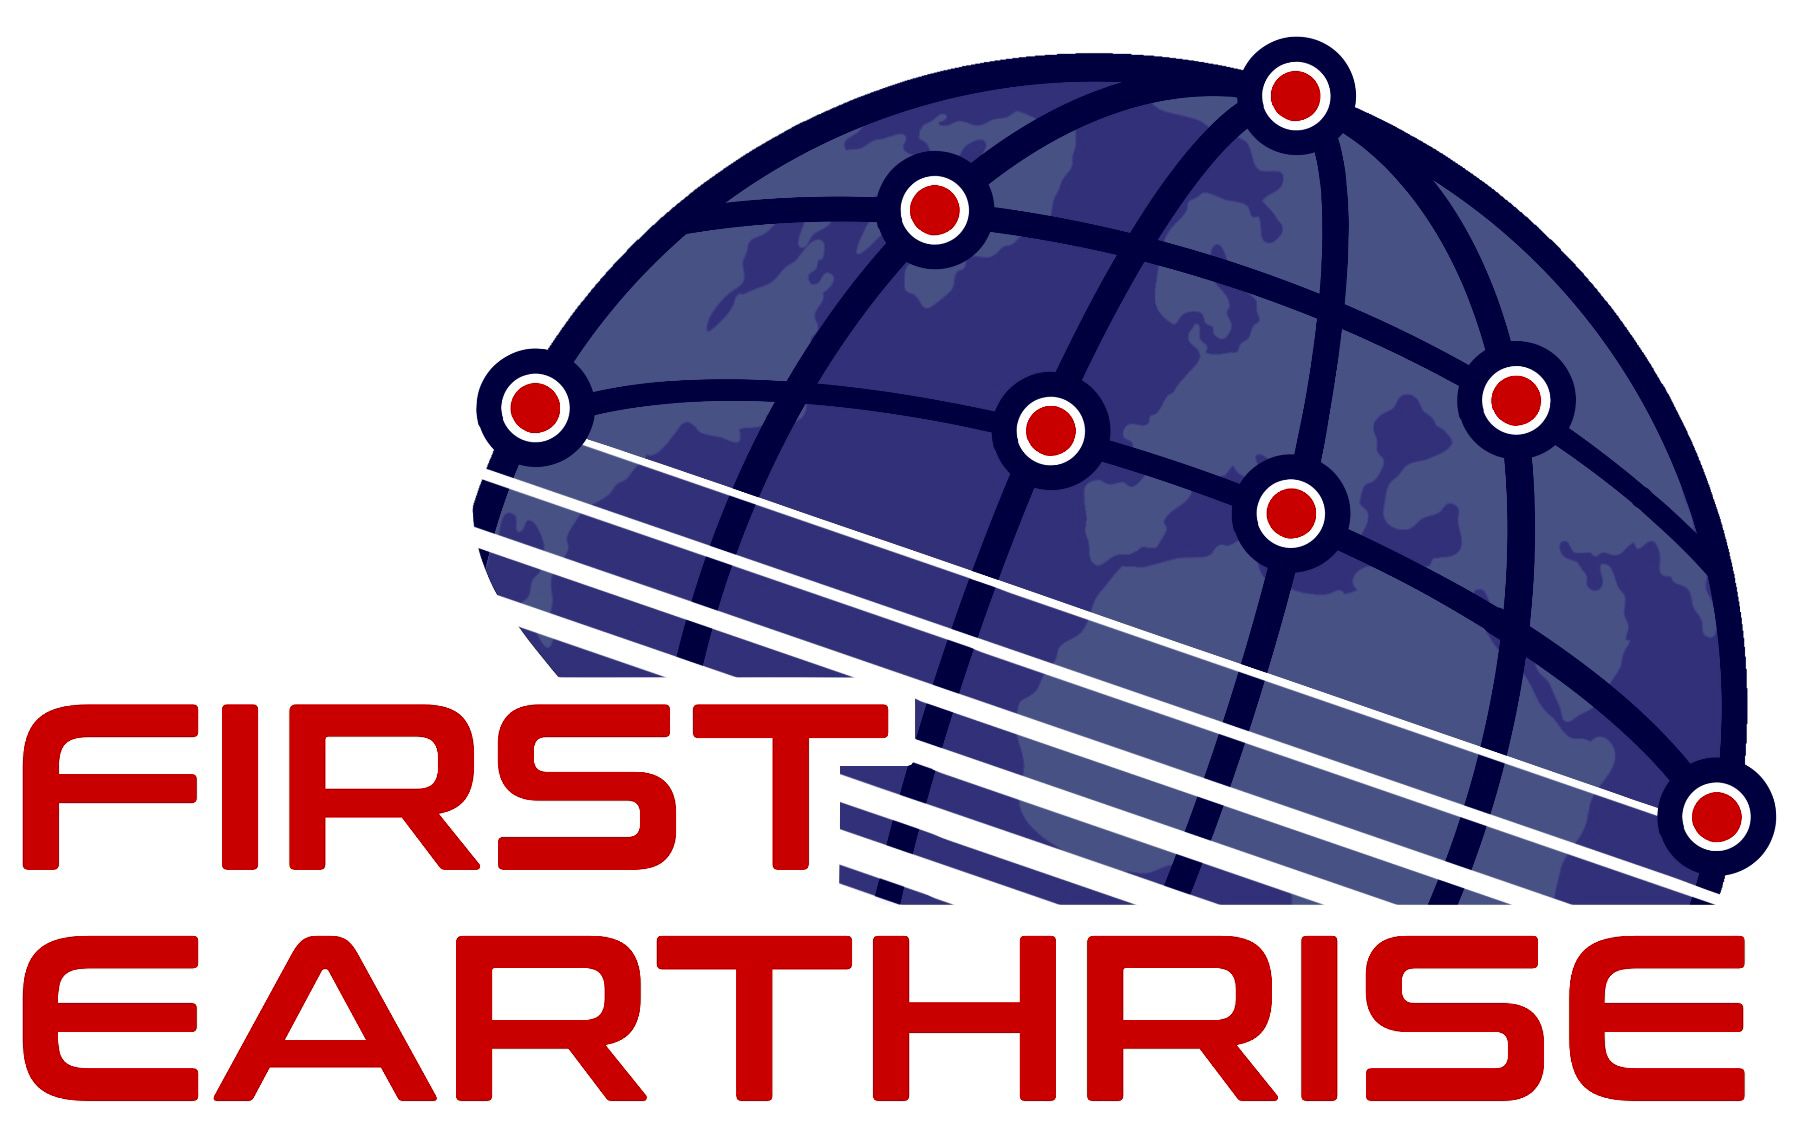 Firstearthrise Digital Collectible Project 